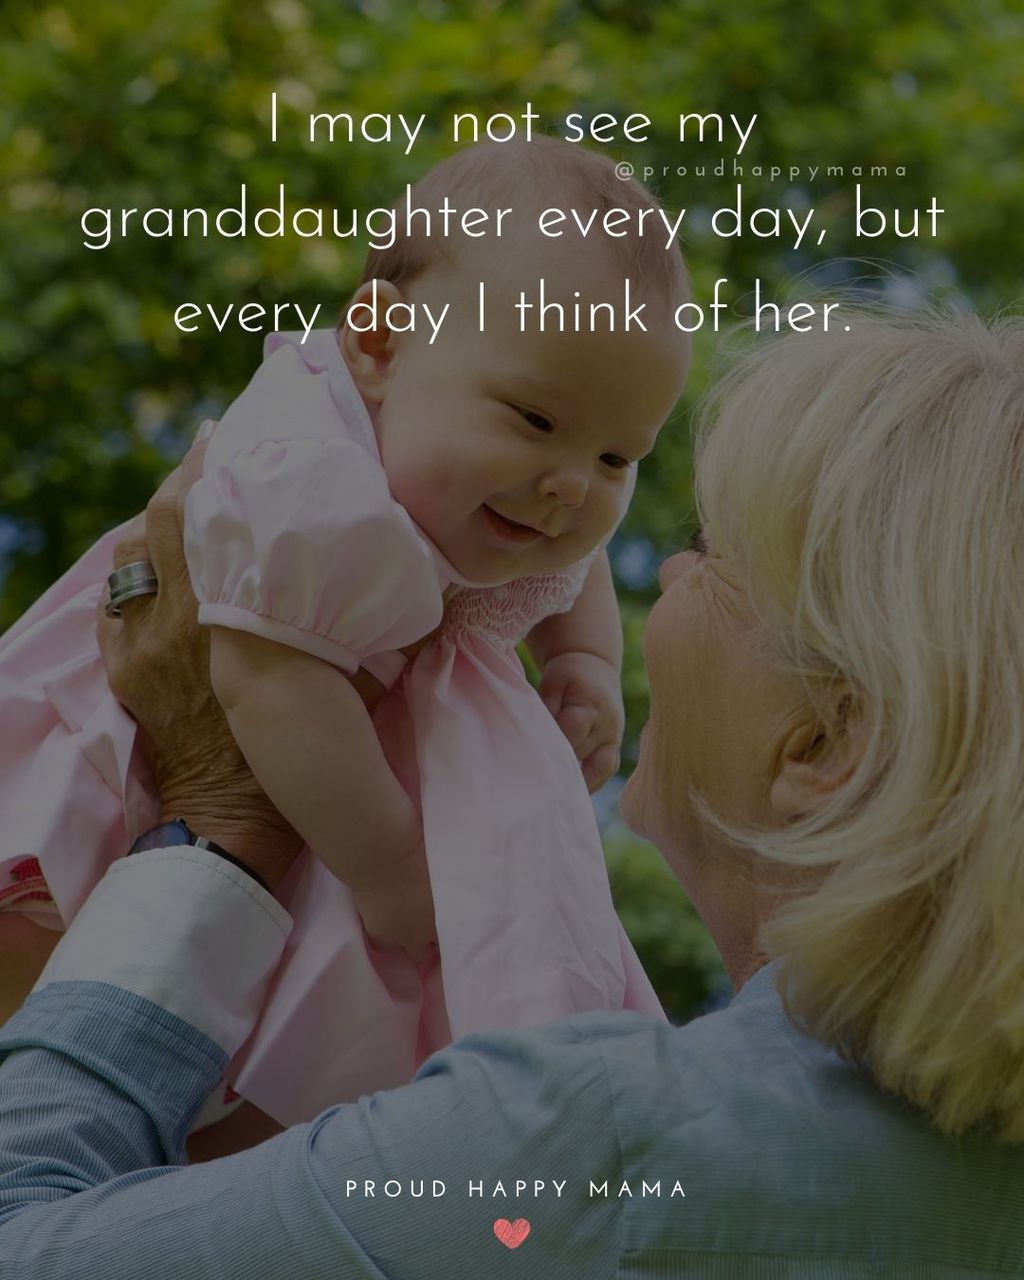 Grandma holding baby granddaughter up in the air with new granddaughter quotes text overlay, ‘I may not see my granddaughter every day, but every day I think of her.’